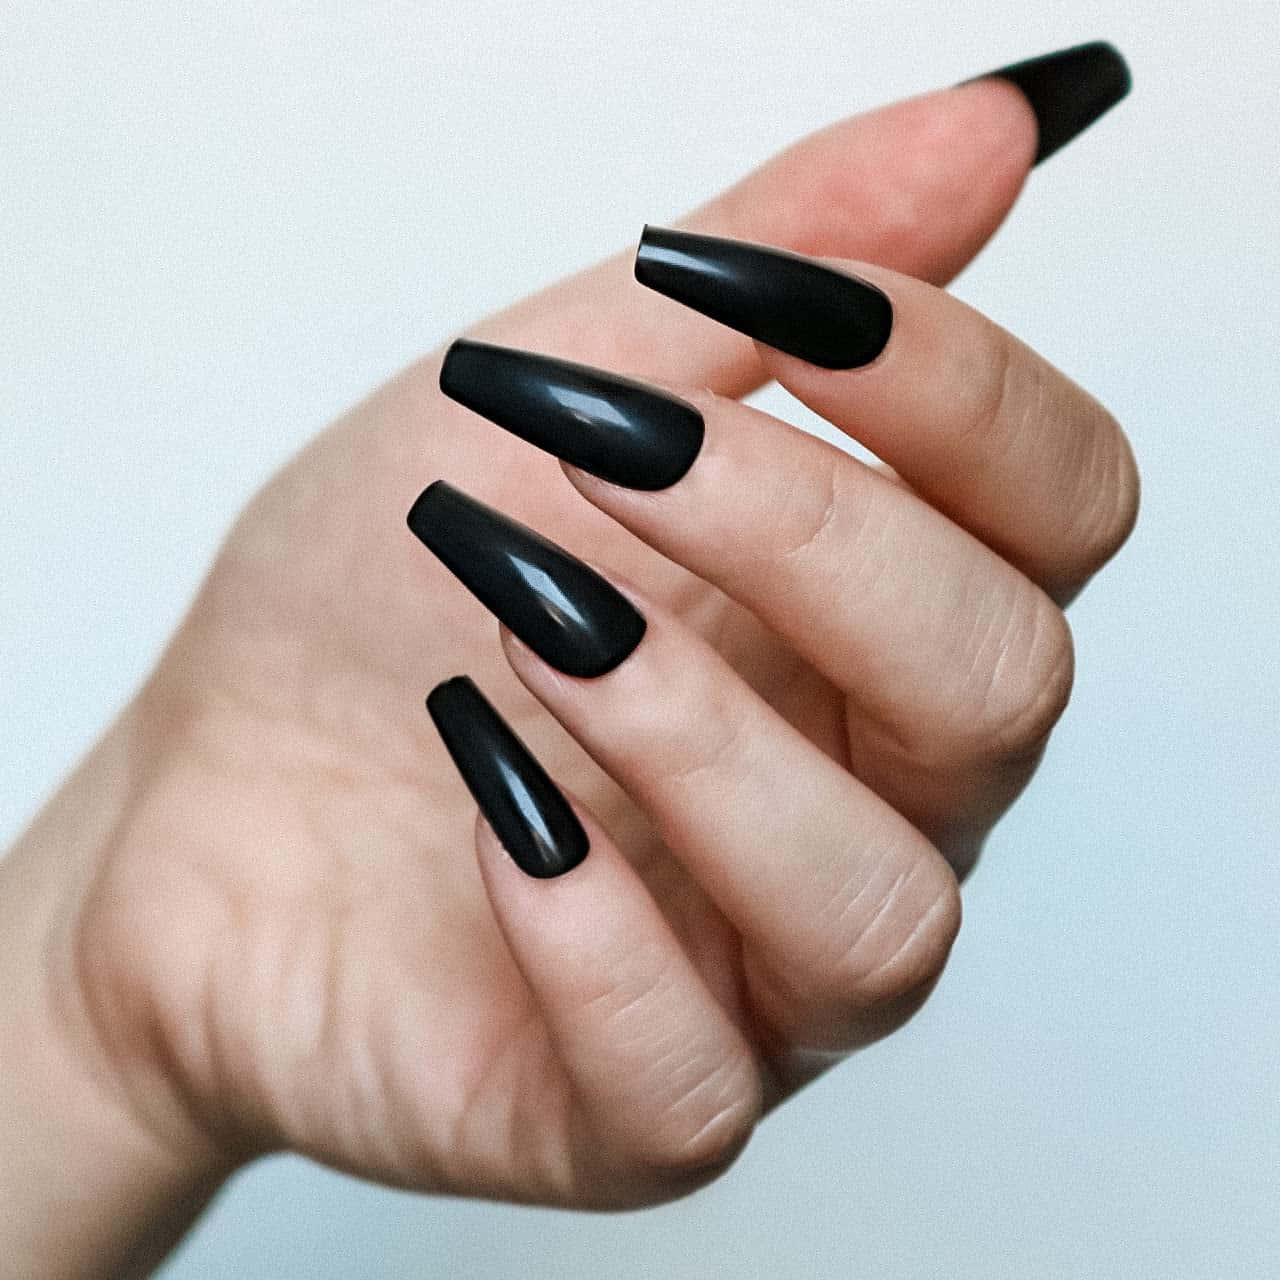 A Woman Holding Black Nails With A Black Tip